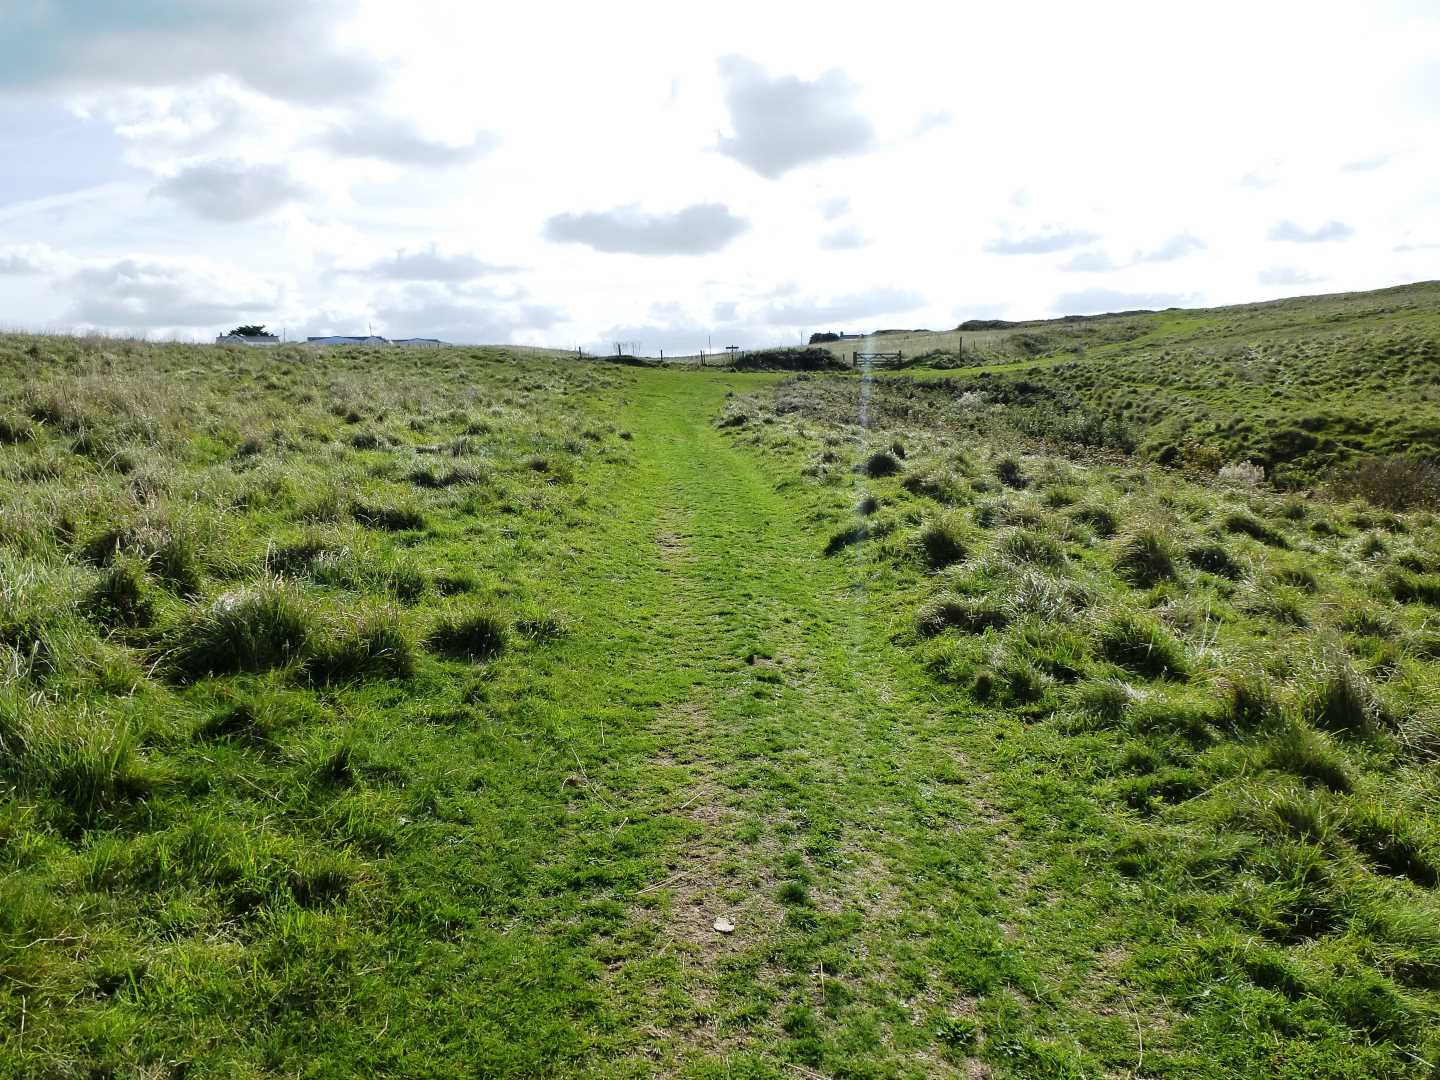 An uphill view of the grass covered dunes with a small wire fence in the distance